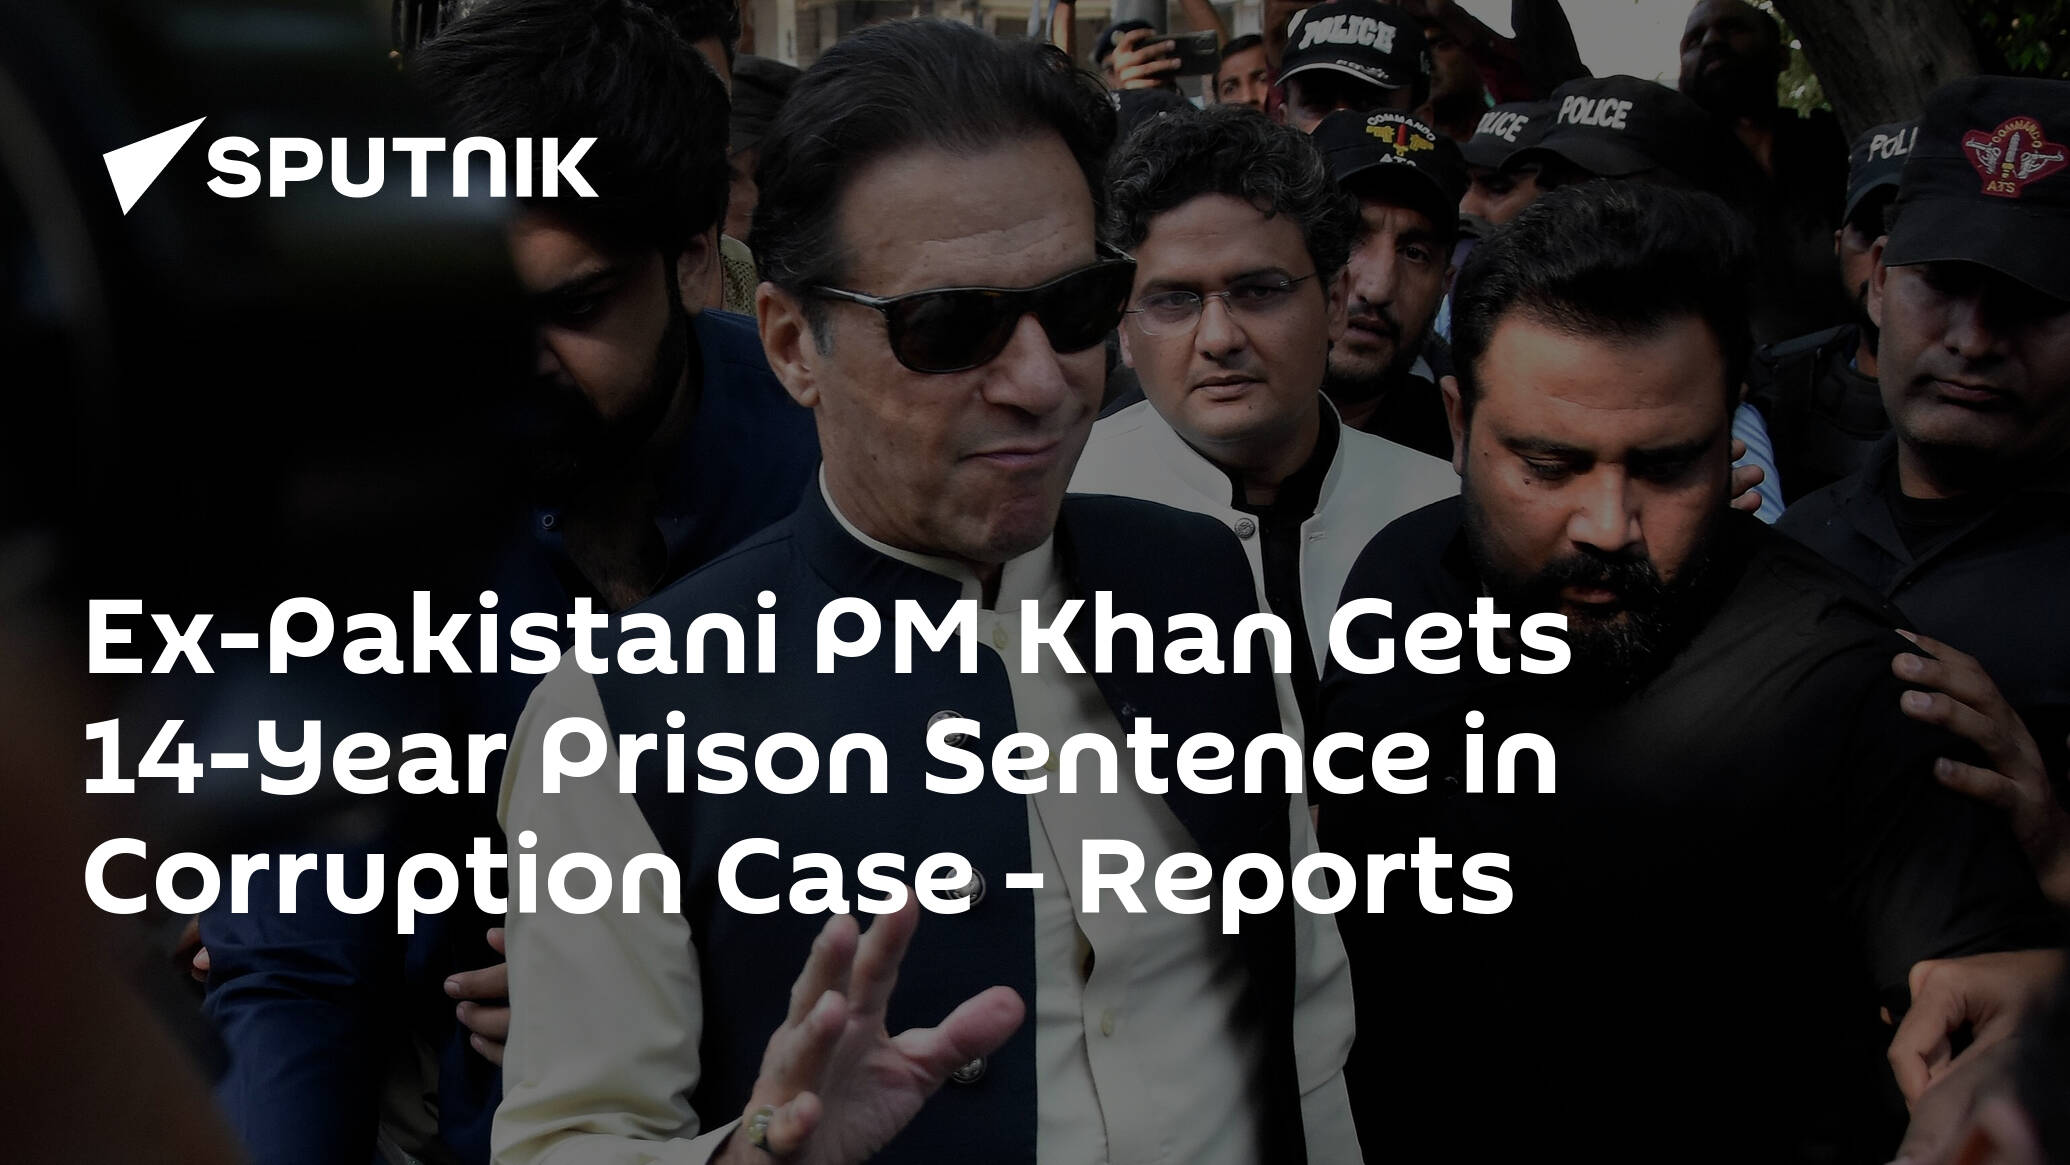 Ex-Pakistani PM Khan Gets 14-Year Prison Sentence in Corruption Case – Reports